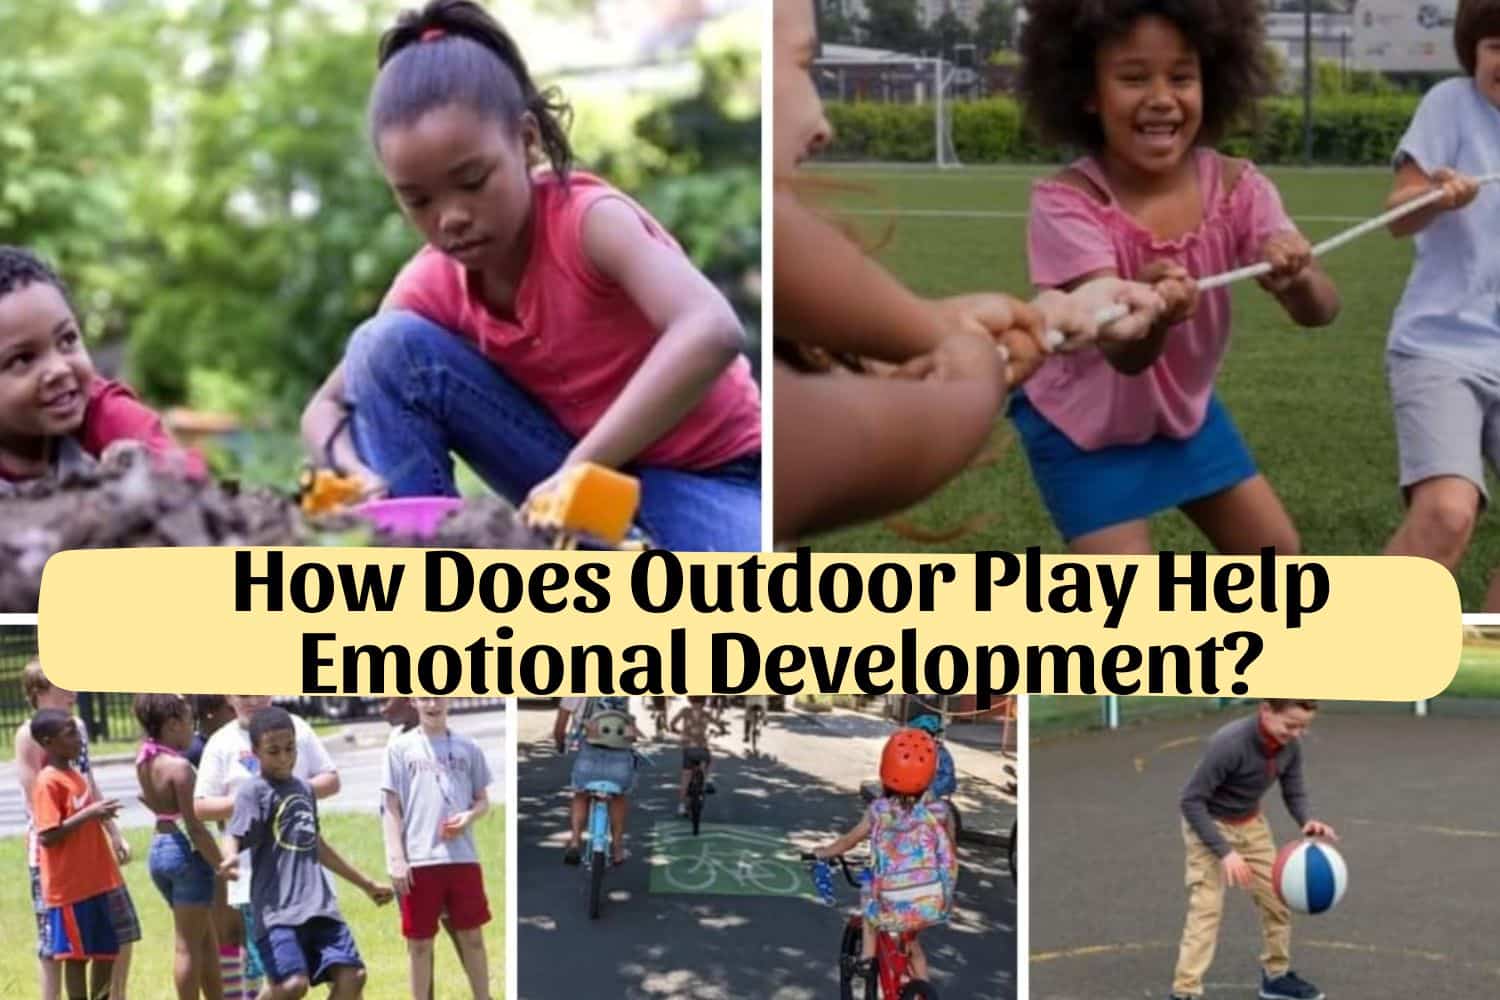 How Does Outdoor Play Help Emotional Development